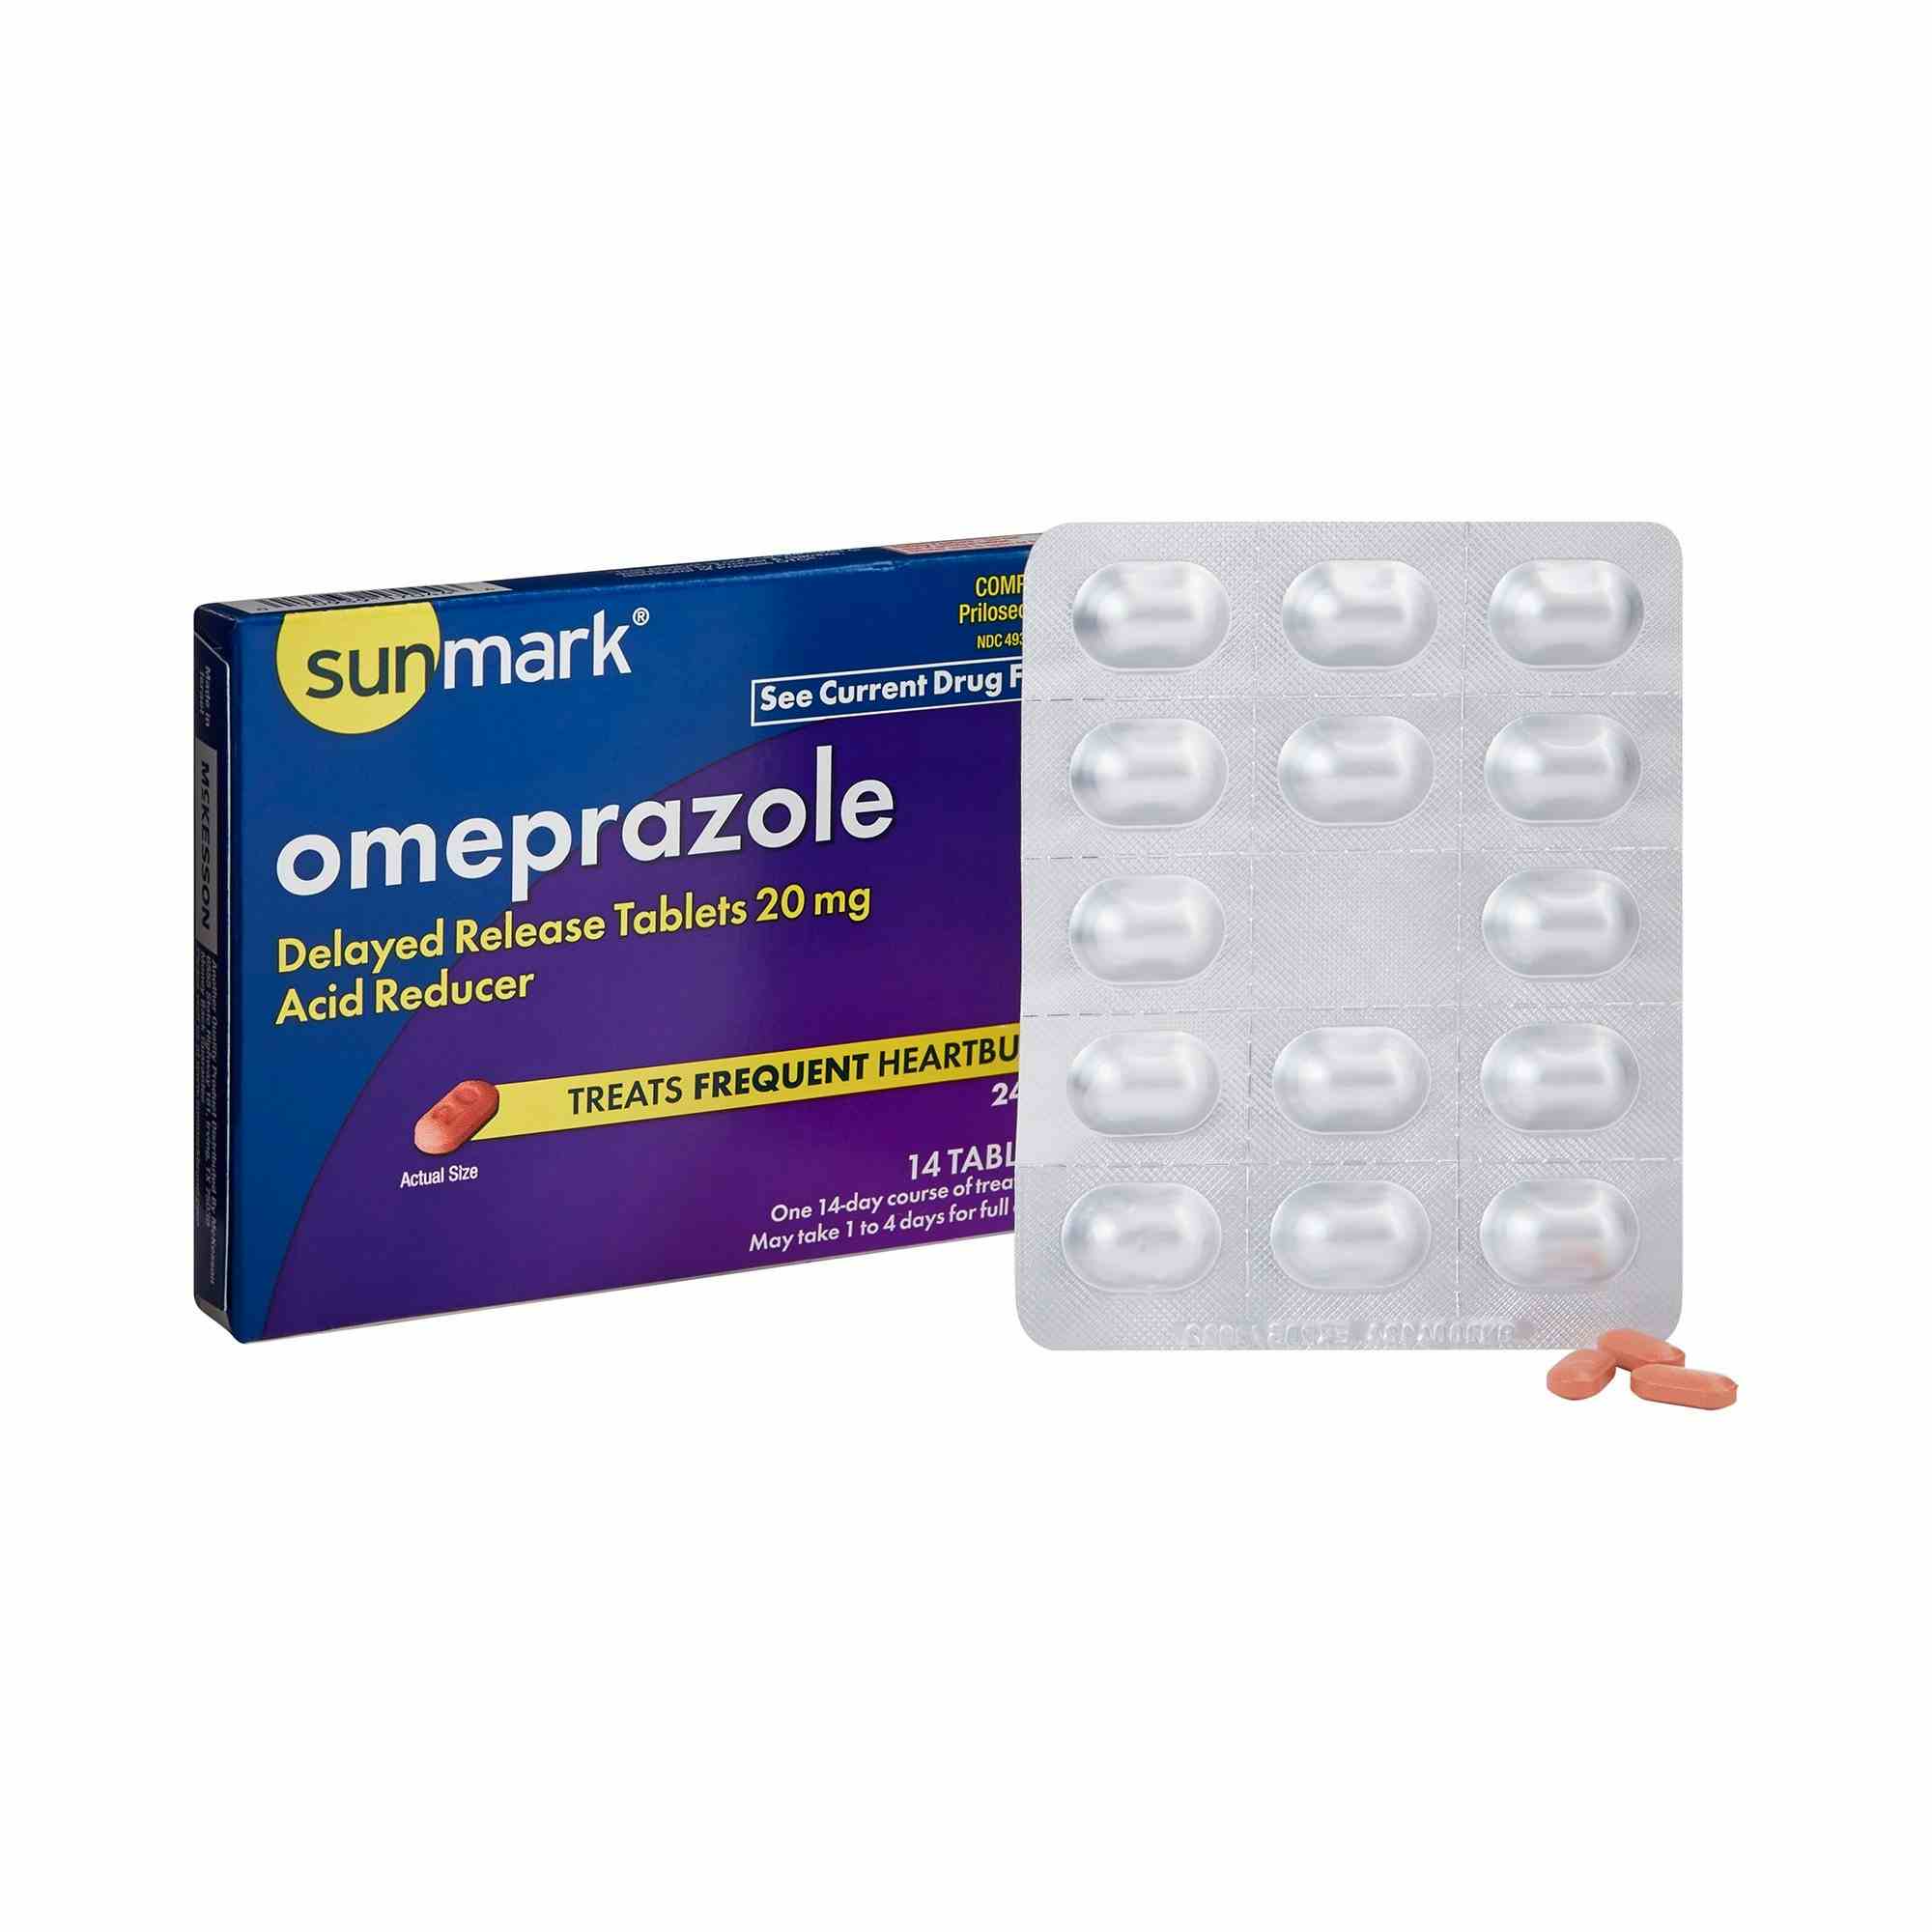 Sunmark Omeprazole Acid Reducer Delayed Release Tablets, 20 mg, 49348084646, Box of 14